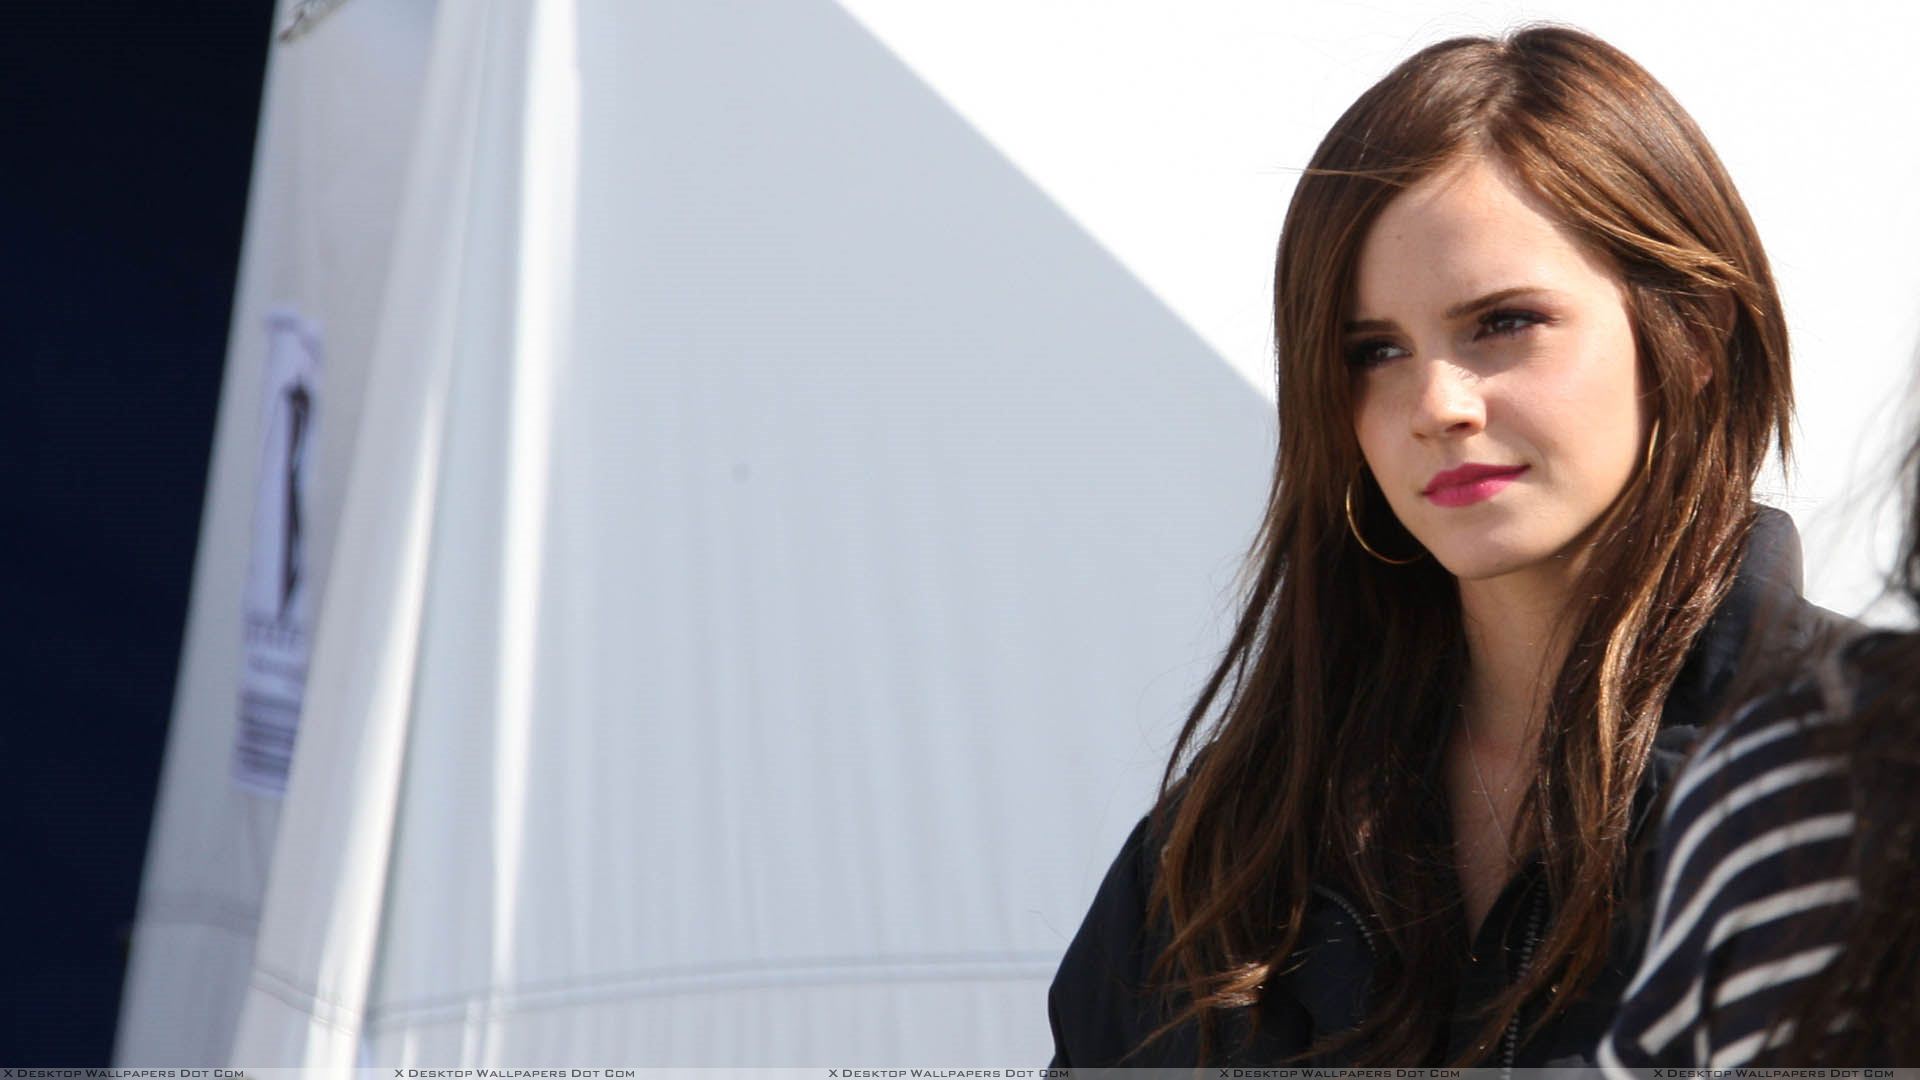 The Bling Ring – A Gangue de Hollywood